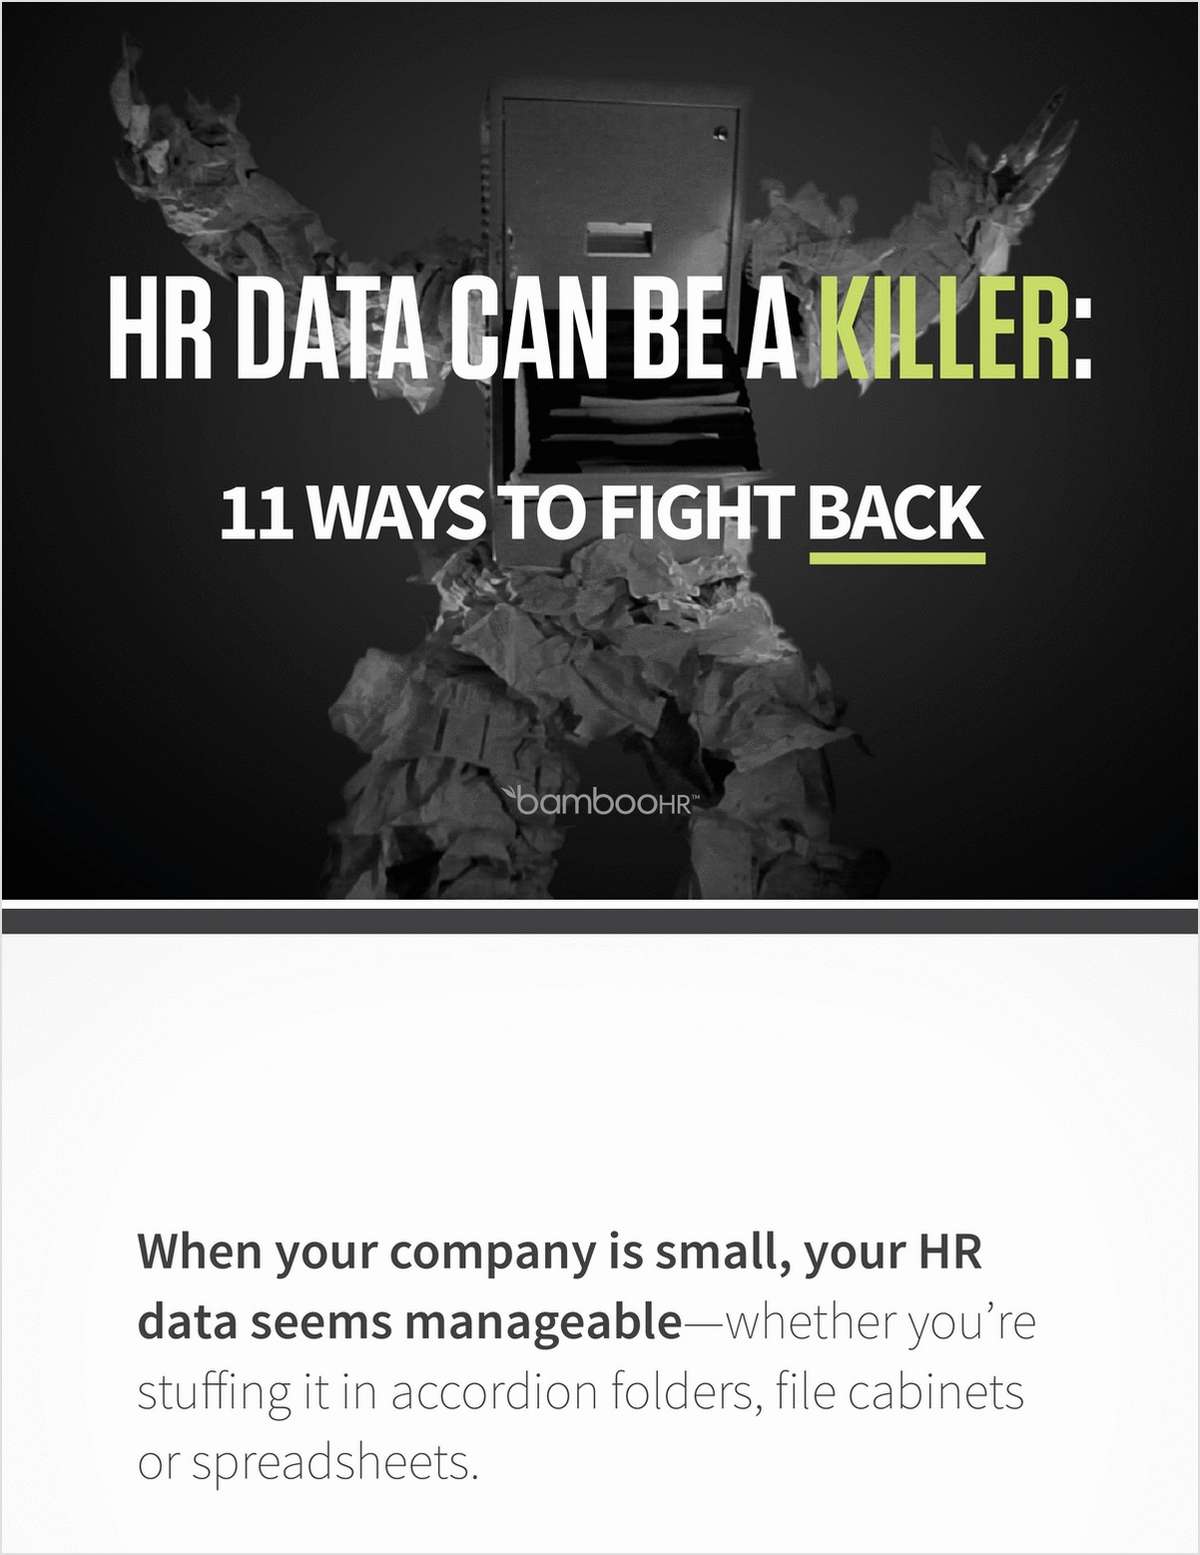 HR Data Can Be A Killer: 11 Ways to Fight Back